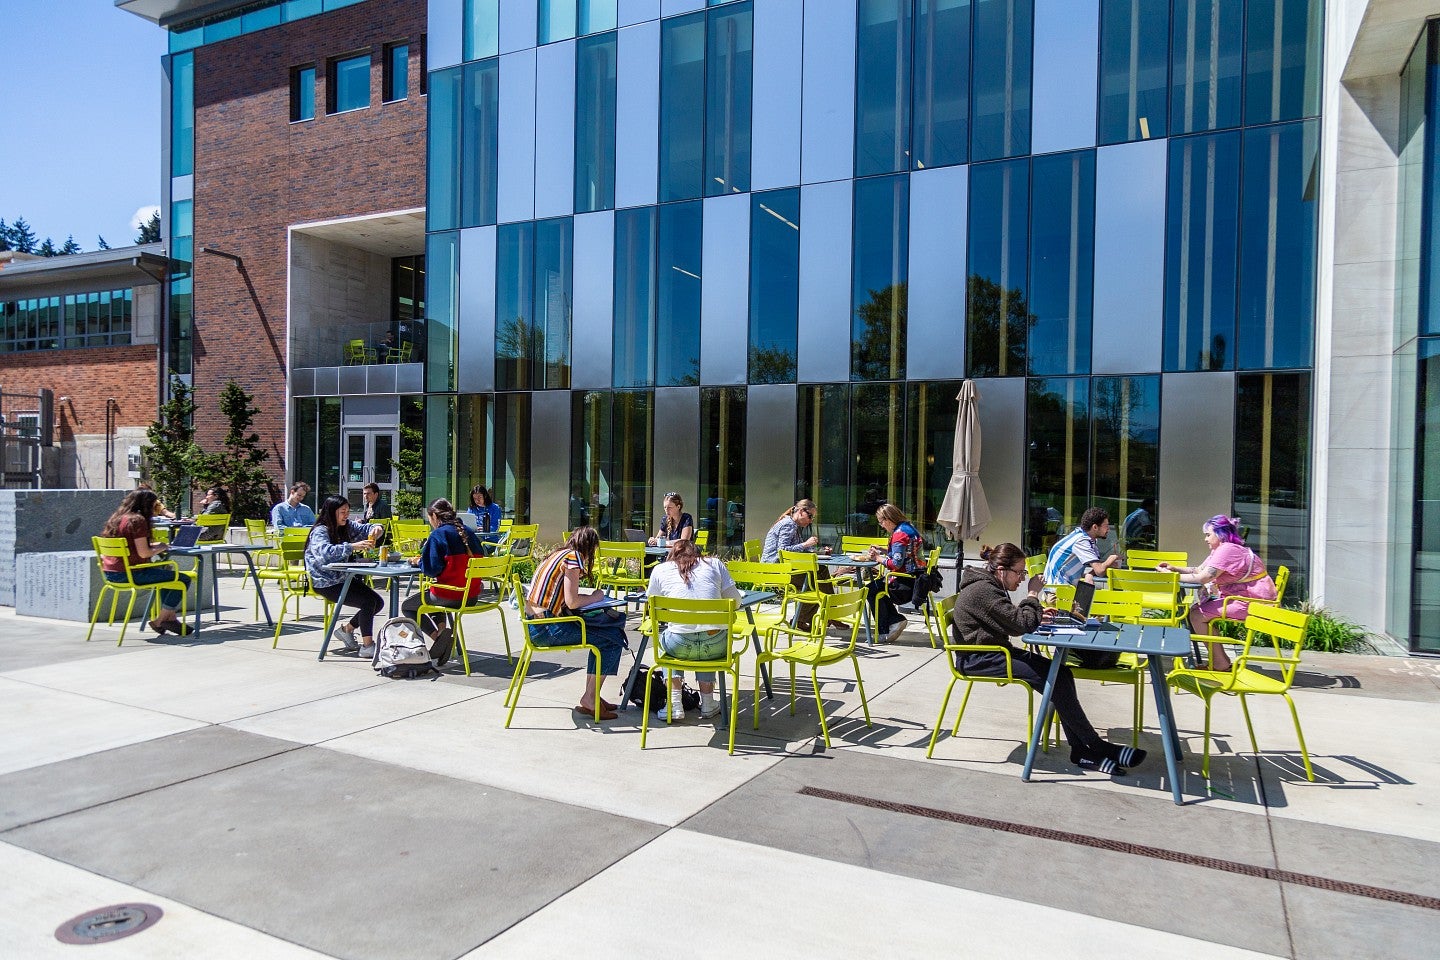 Images of campus taken April 24, 2019. Students stitting outside of the EMU at tables.